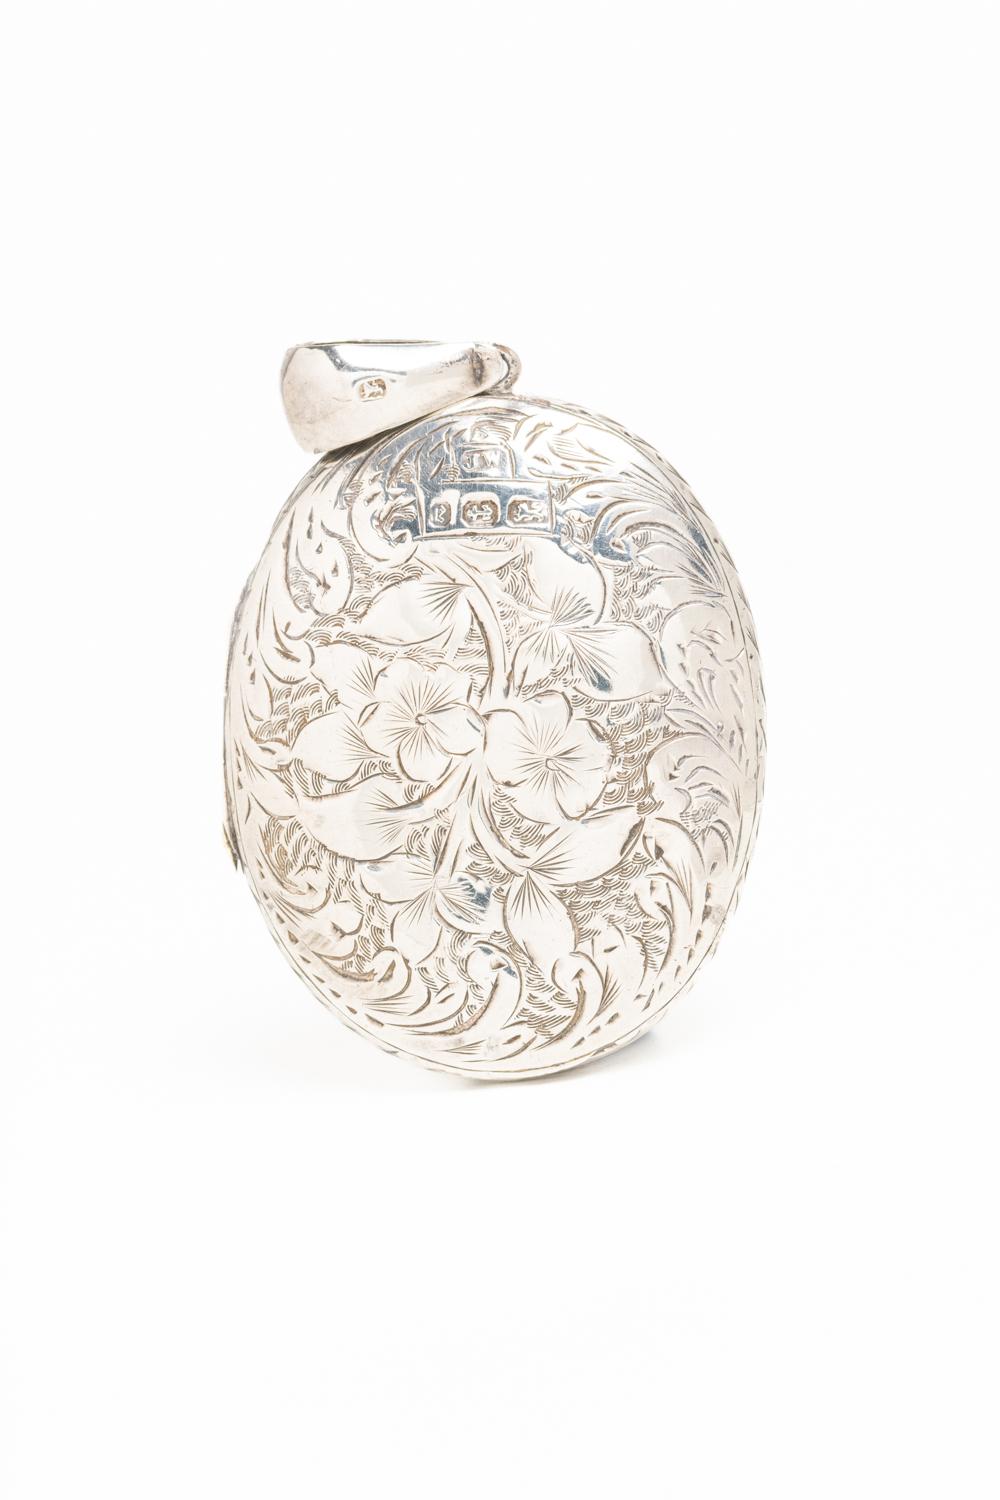 Women's Victorian Aesthetic Movement Sterling Silver Floral Locket For Sale